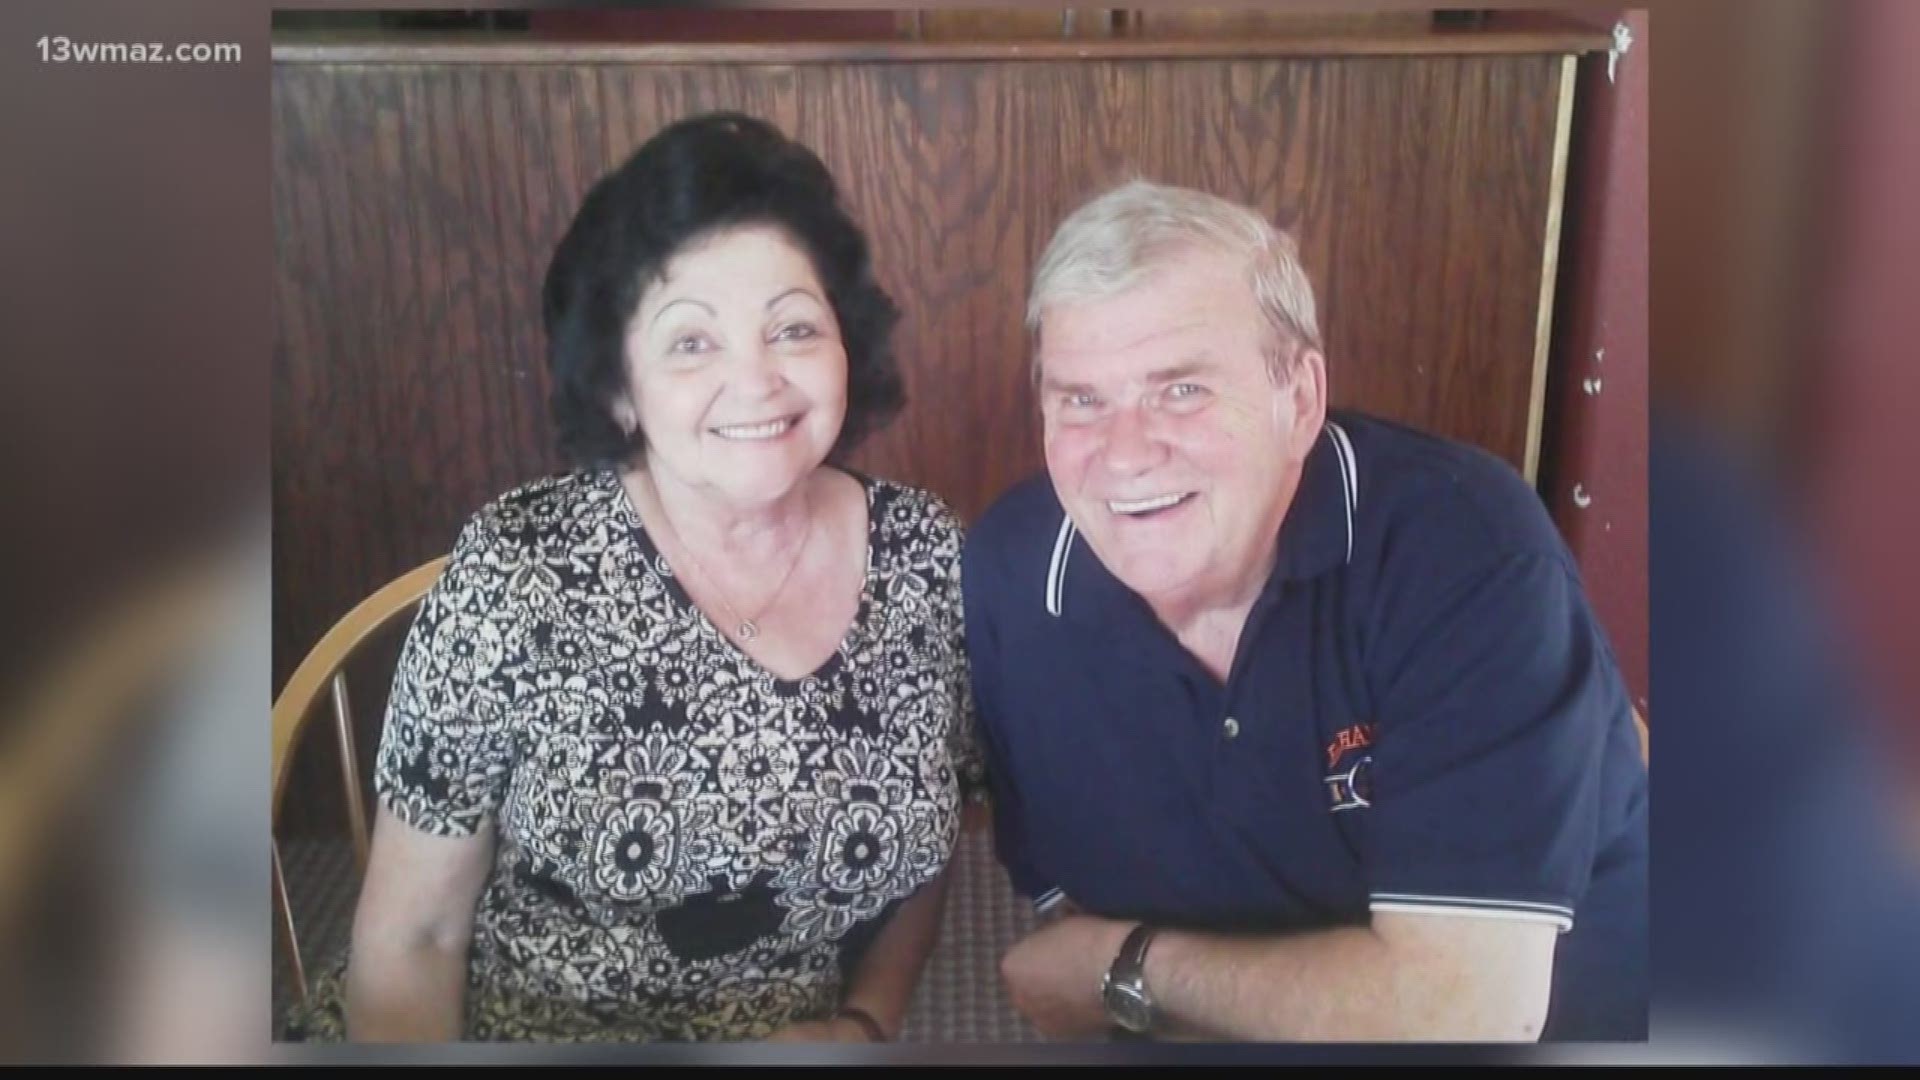 The family of a Houston County veteran is relieved to hear the stay-at-home order after they lost their loved one to a coronavirus-related death.